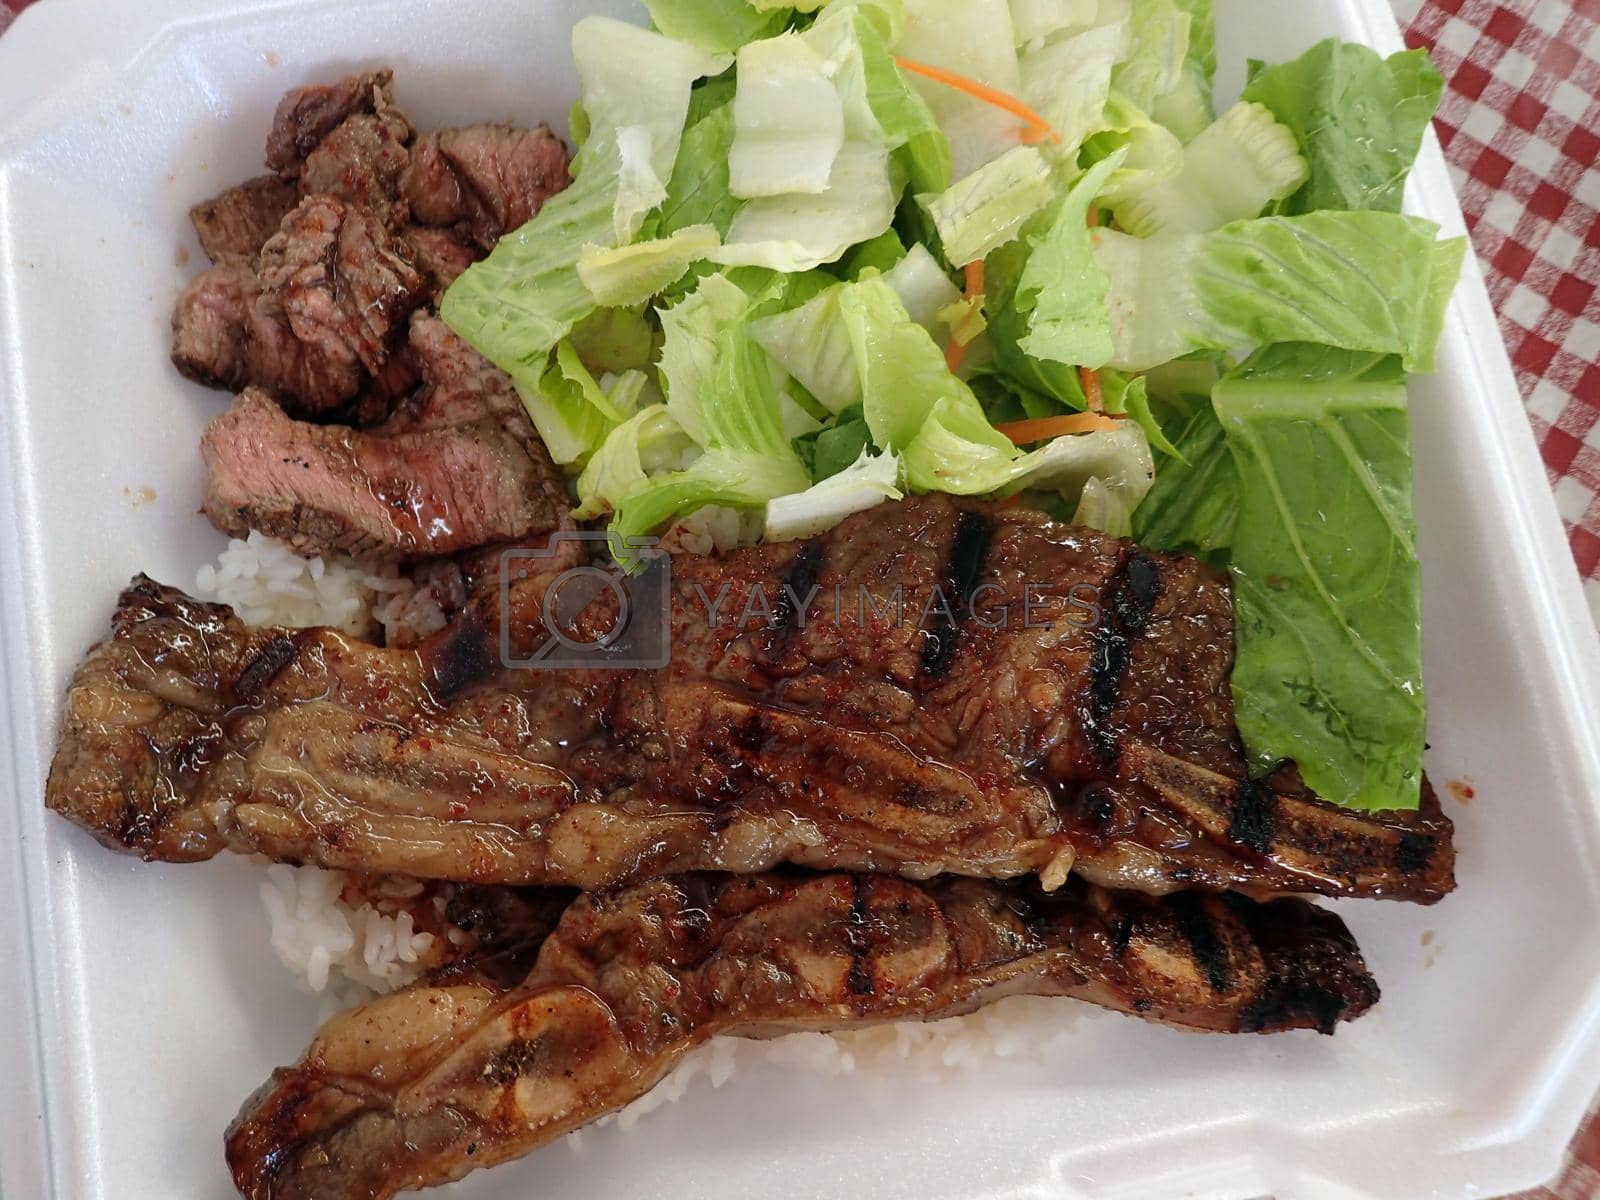 Royalty free image of Steak, Kalbi, Side salad and white rice in a styrofoam plate by EricGBVD